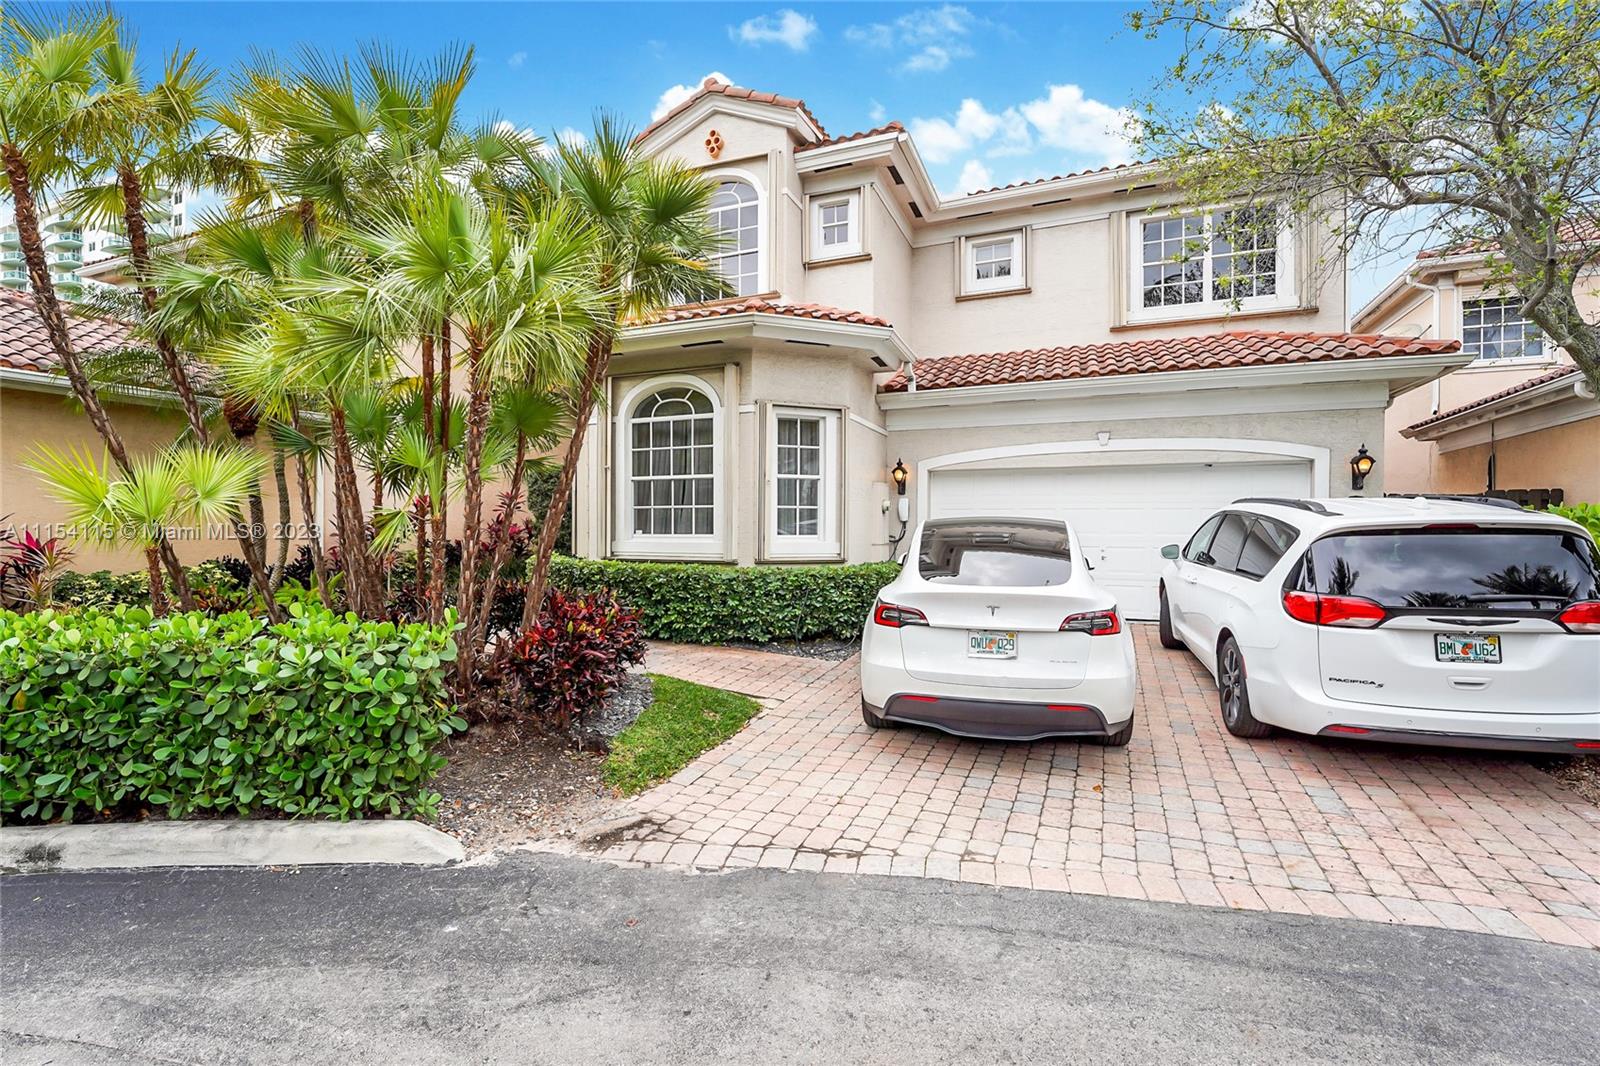 Beautiful two story home in Golden Gate Estates. This home features 5 beds/5.5 baths with pool and jacuzzi. Also features two car parking spaces. Best Location in Sunny Isles!